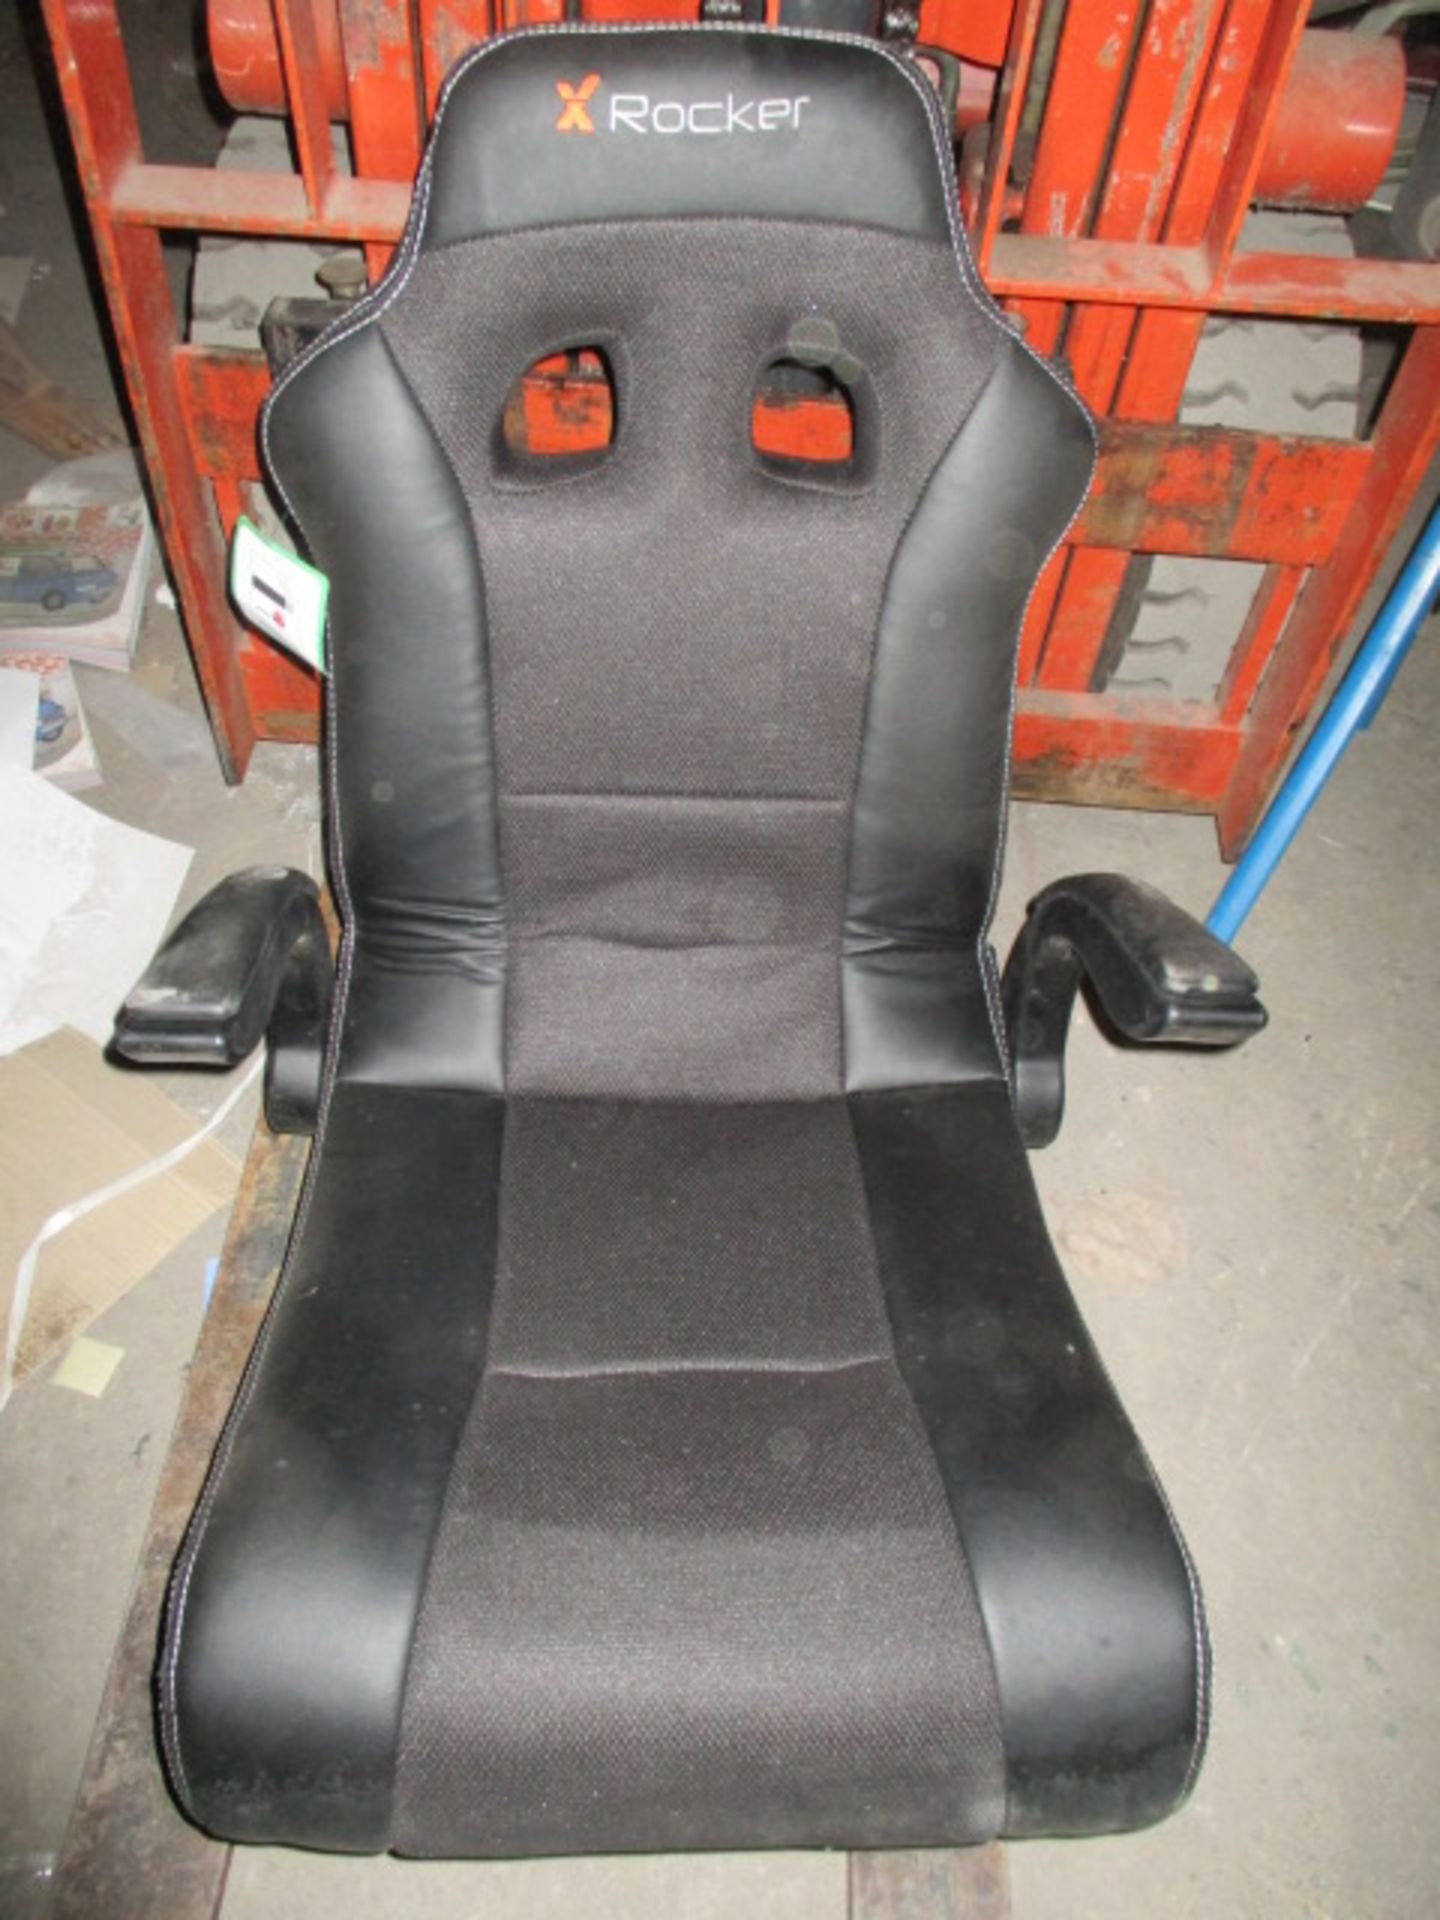 X Rocker Pro Gaming Chair - RRP £199.99 Each   Please note: Chairs only - No base/cables are - Image 2 of 4